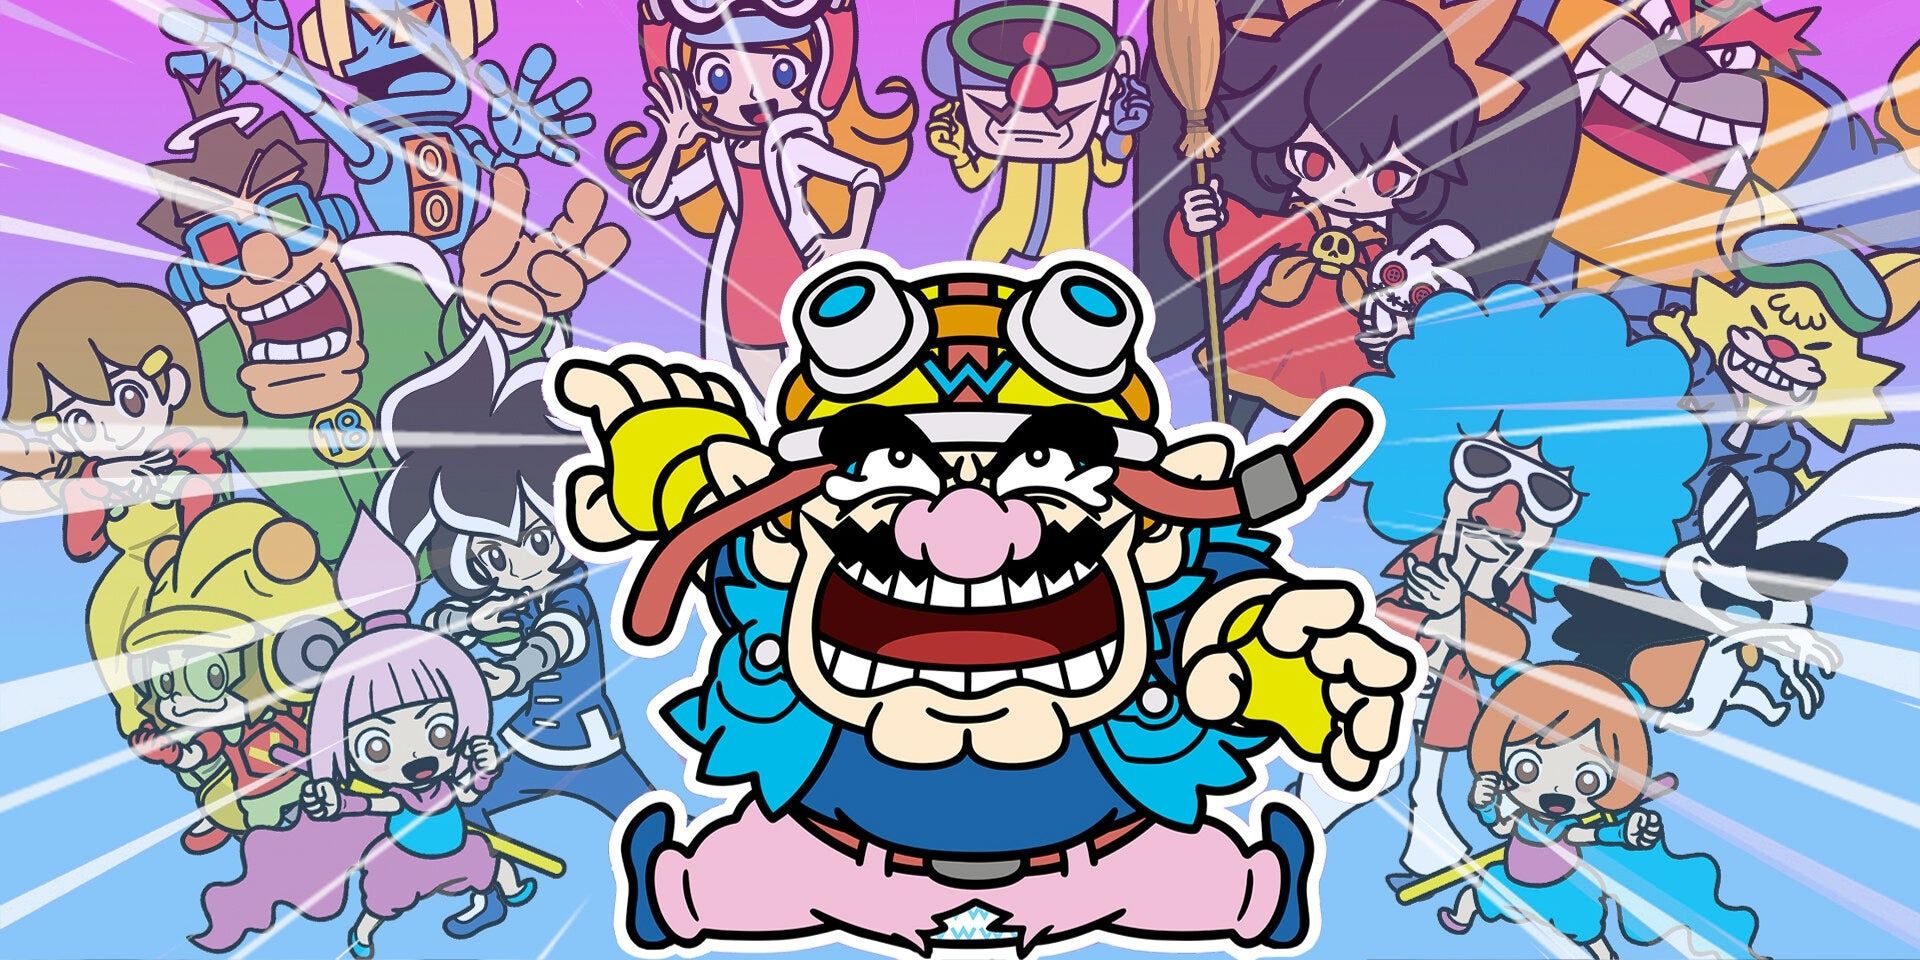 The cover art of WarioWare: Get It Together